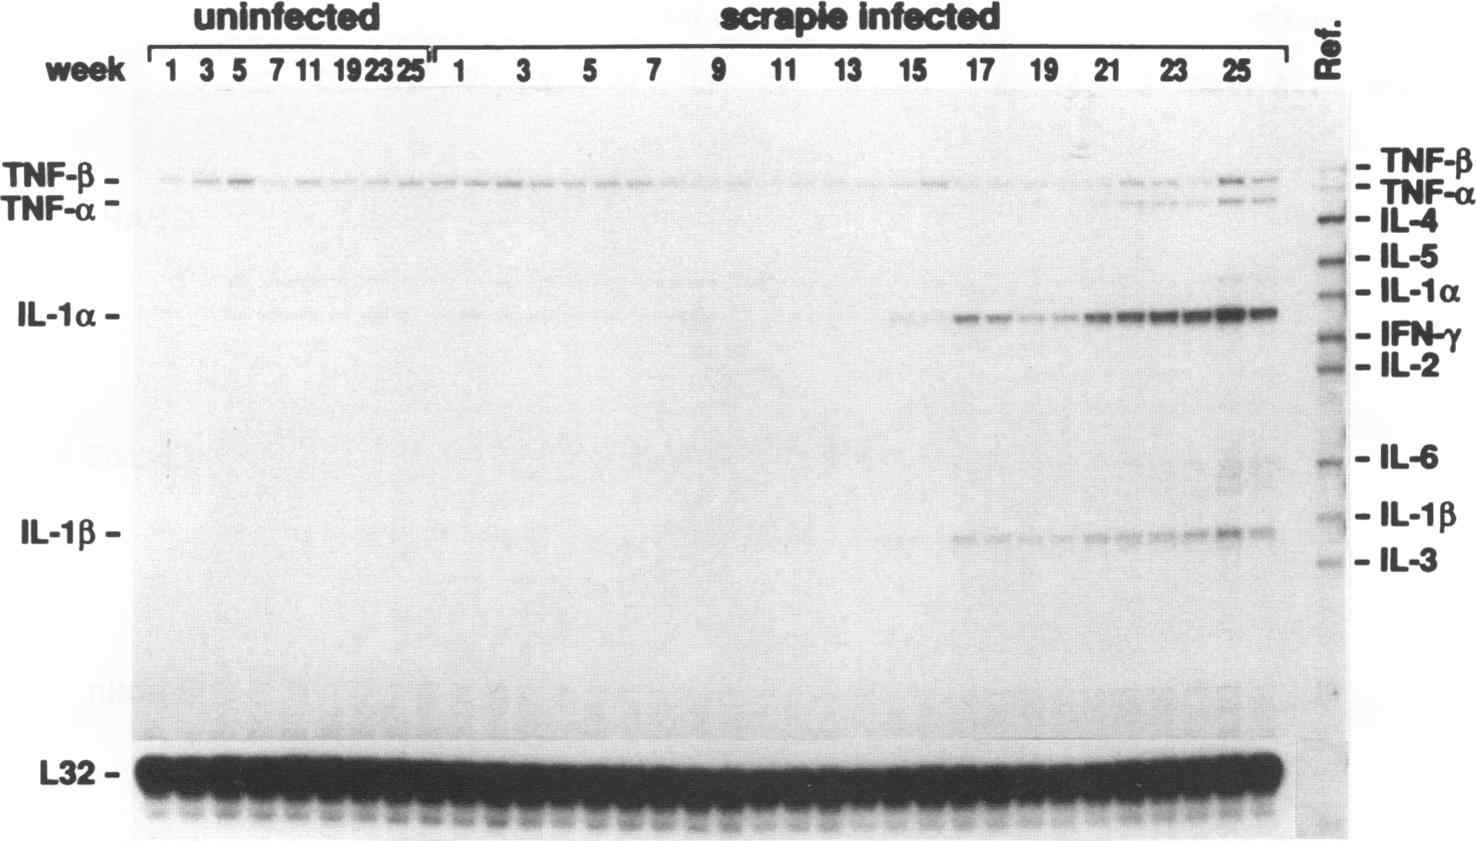 (Fig. 7-1. Comparison of cytokine mRNA expression between control and scrapie group